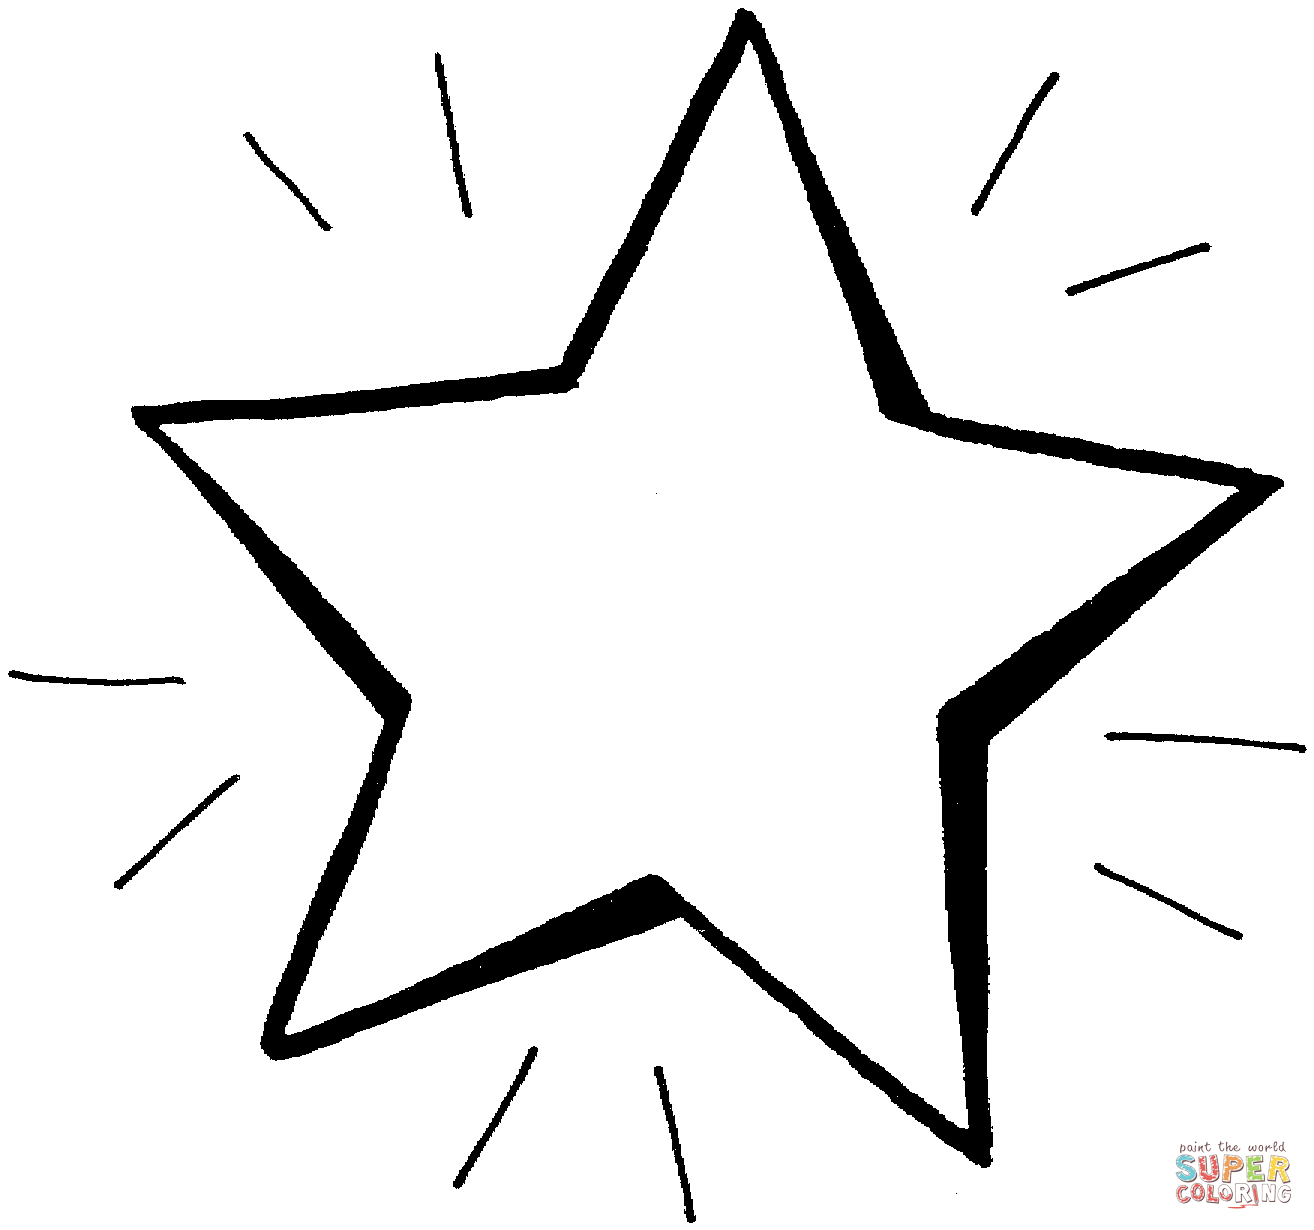 Coloring Page Of A Star Star Coloring Pages Free Printable Pictures